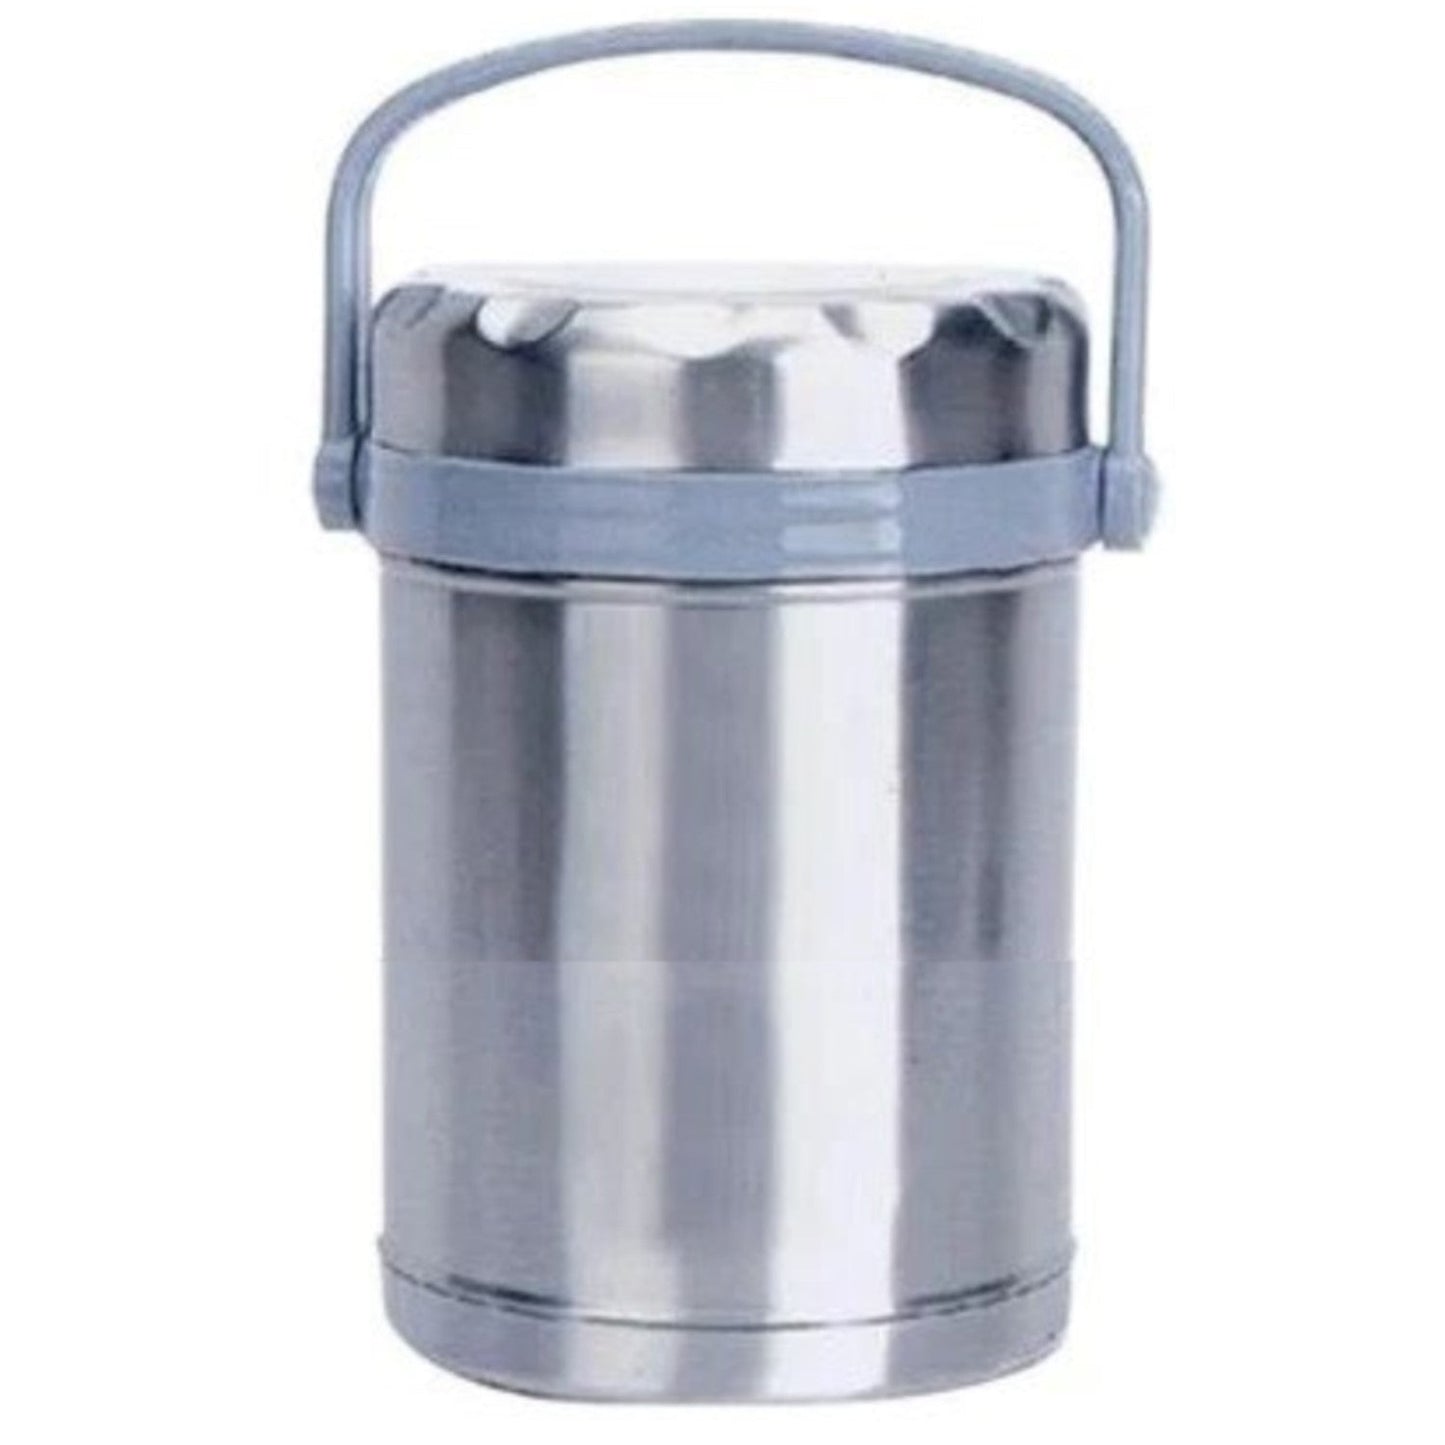 Medium 2 Containers Stainless Steel Thermal Pot